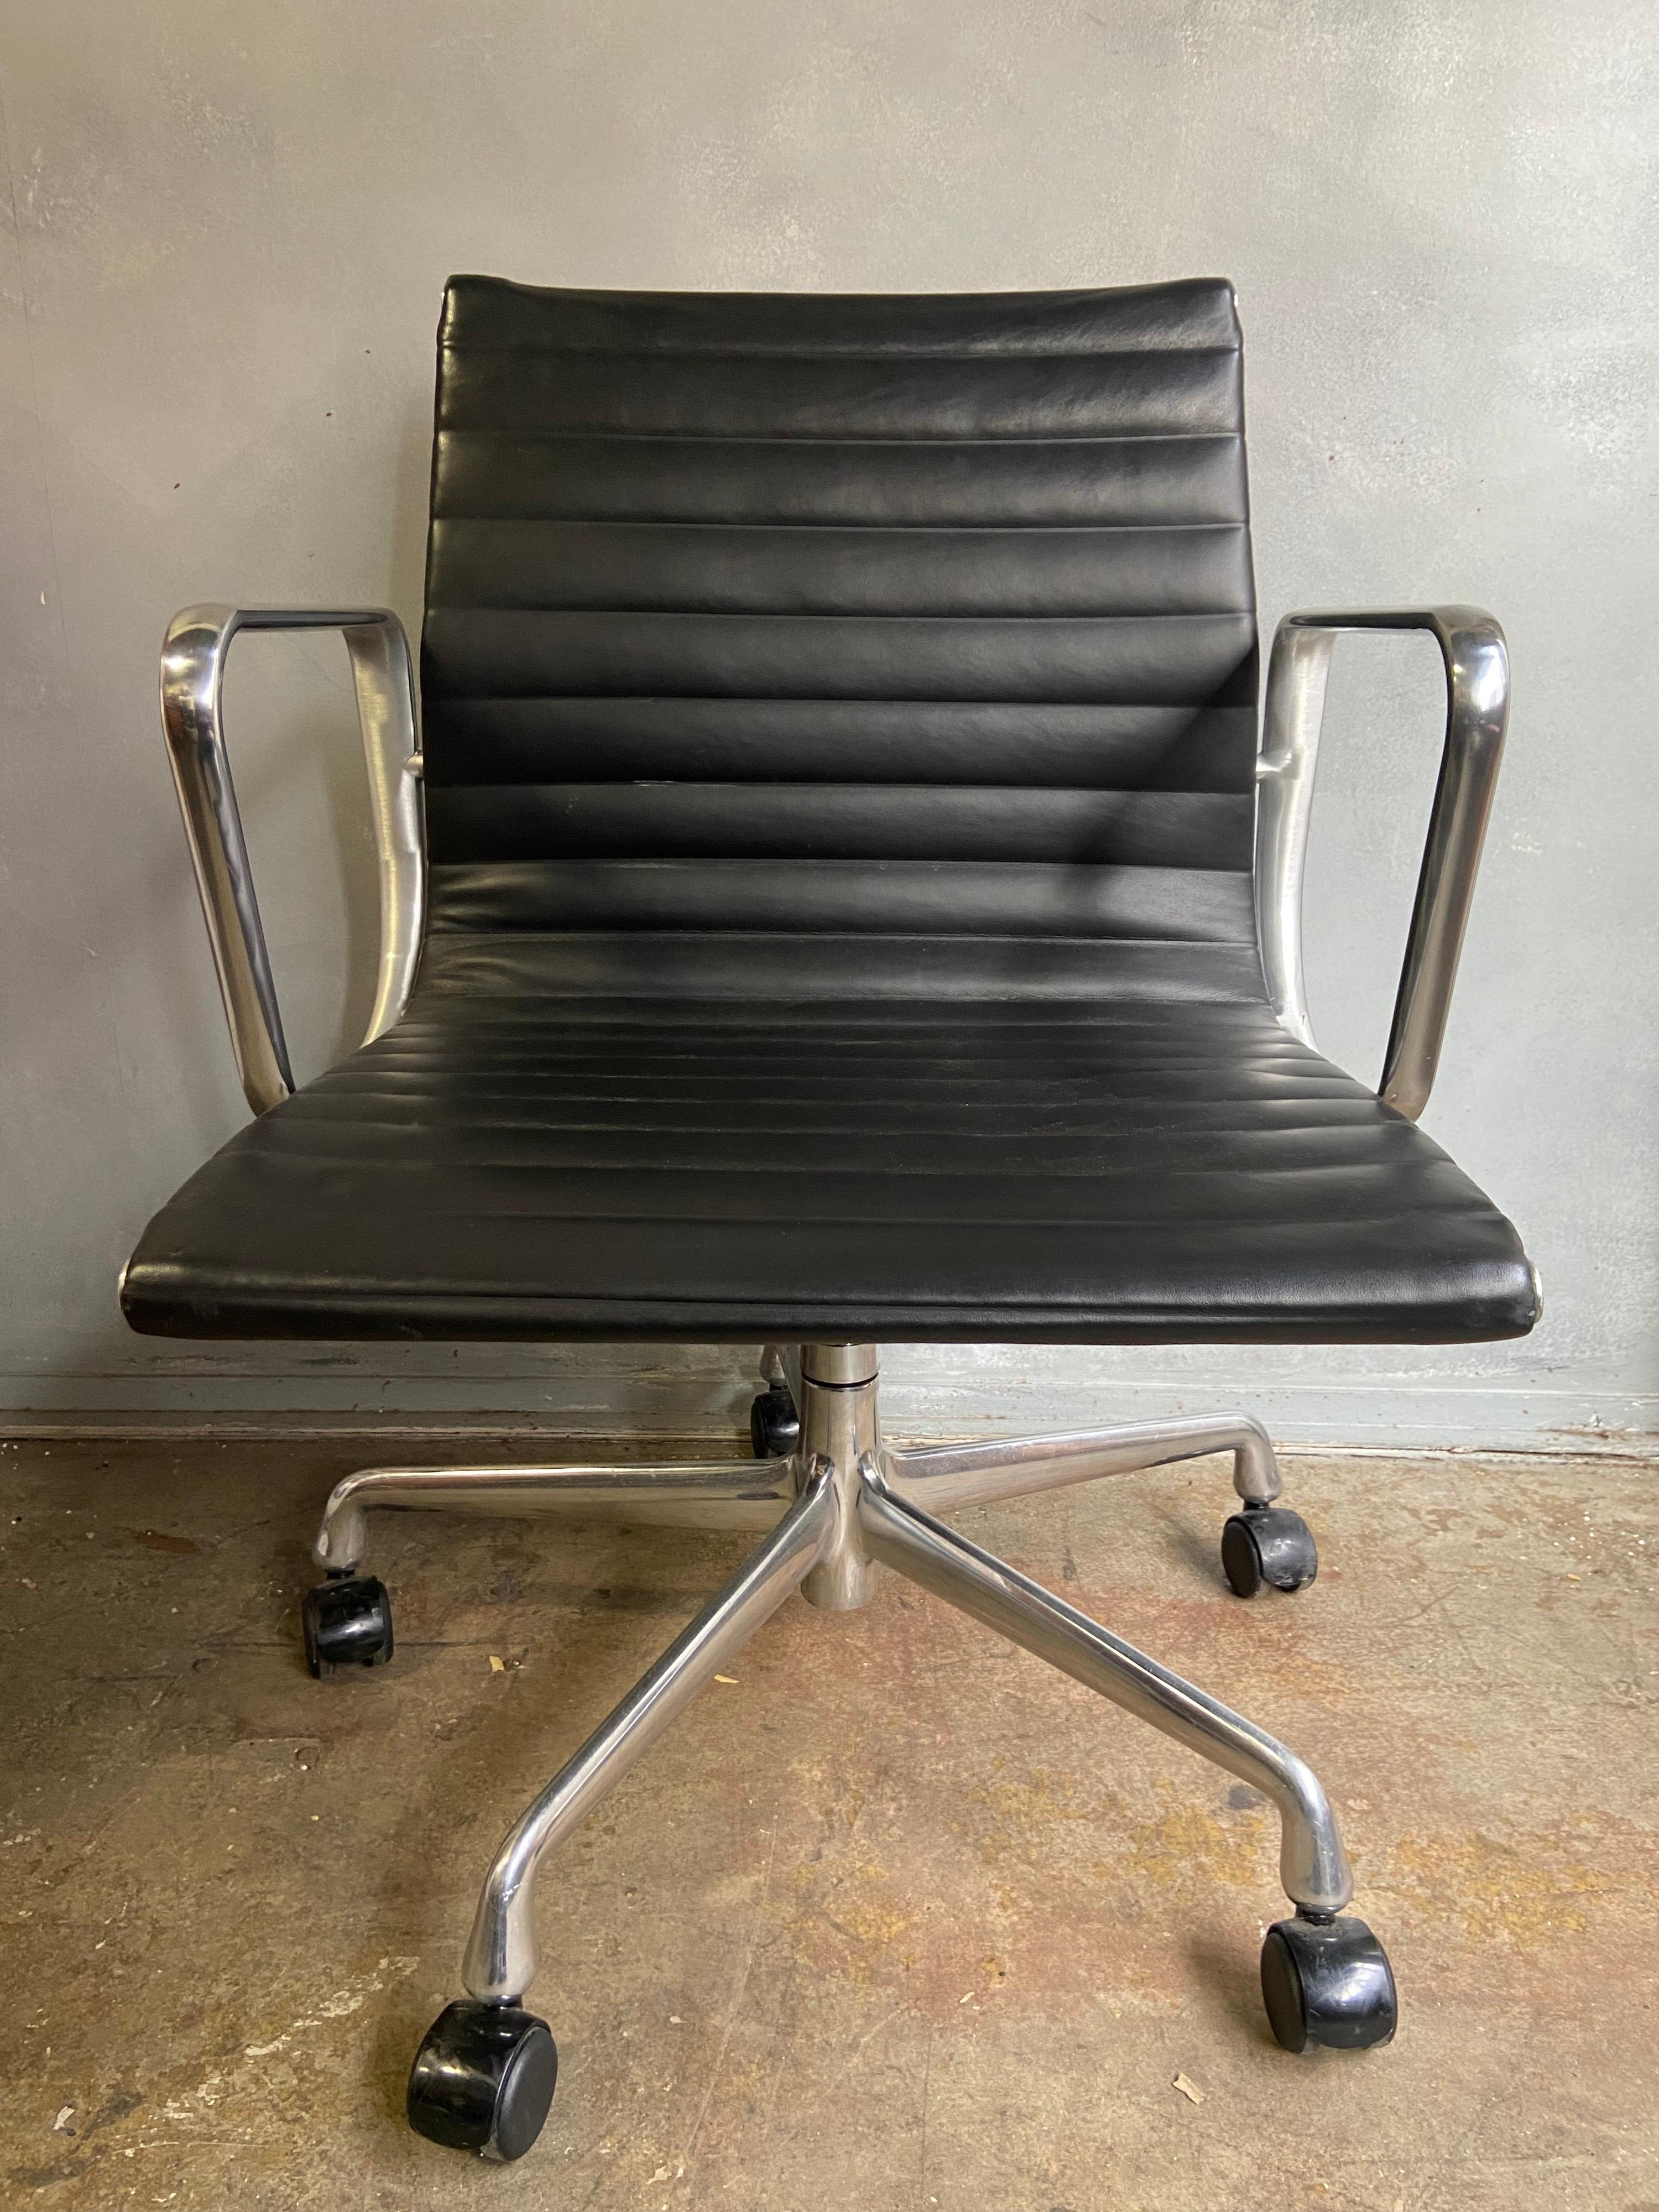 20th Century Mid-Century Eames Aluminium Group Management Chairs for Herman Miller